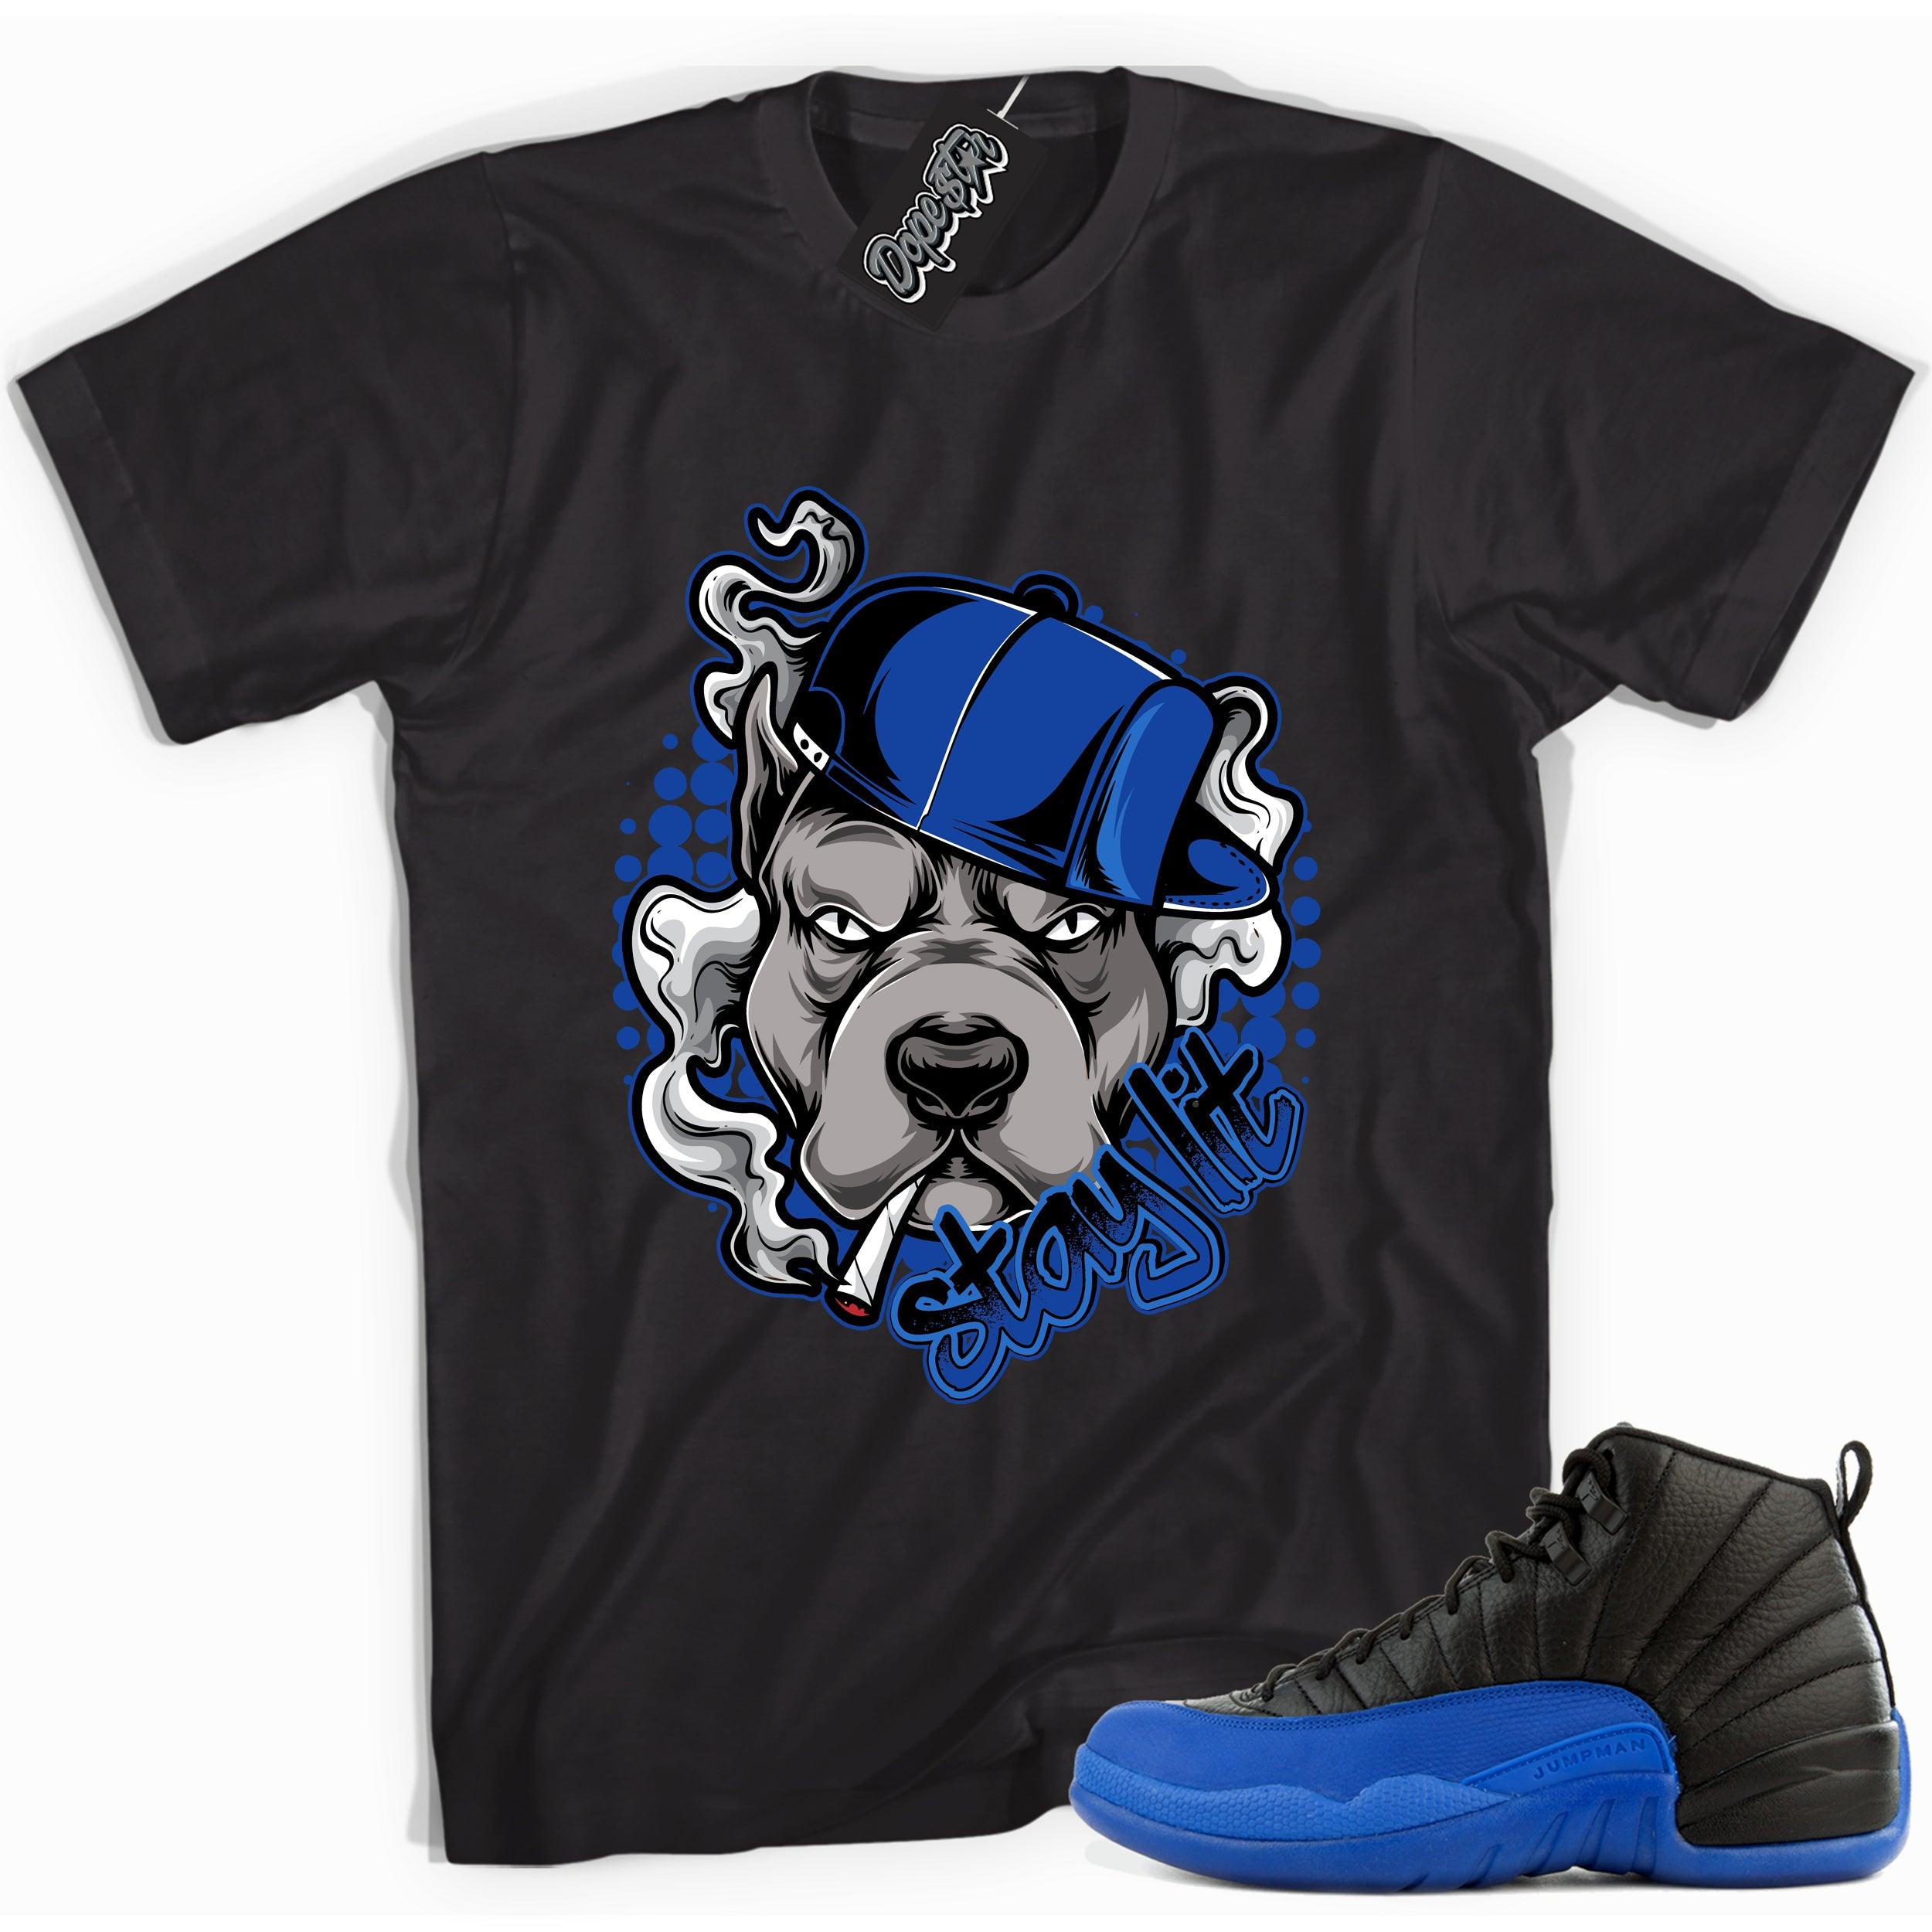 Cool black graphic tee with 'stay lit' print, that perfectly matches  Air Jordan 12 Retro Black Game Royal sneakers.